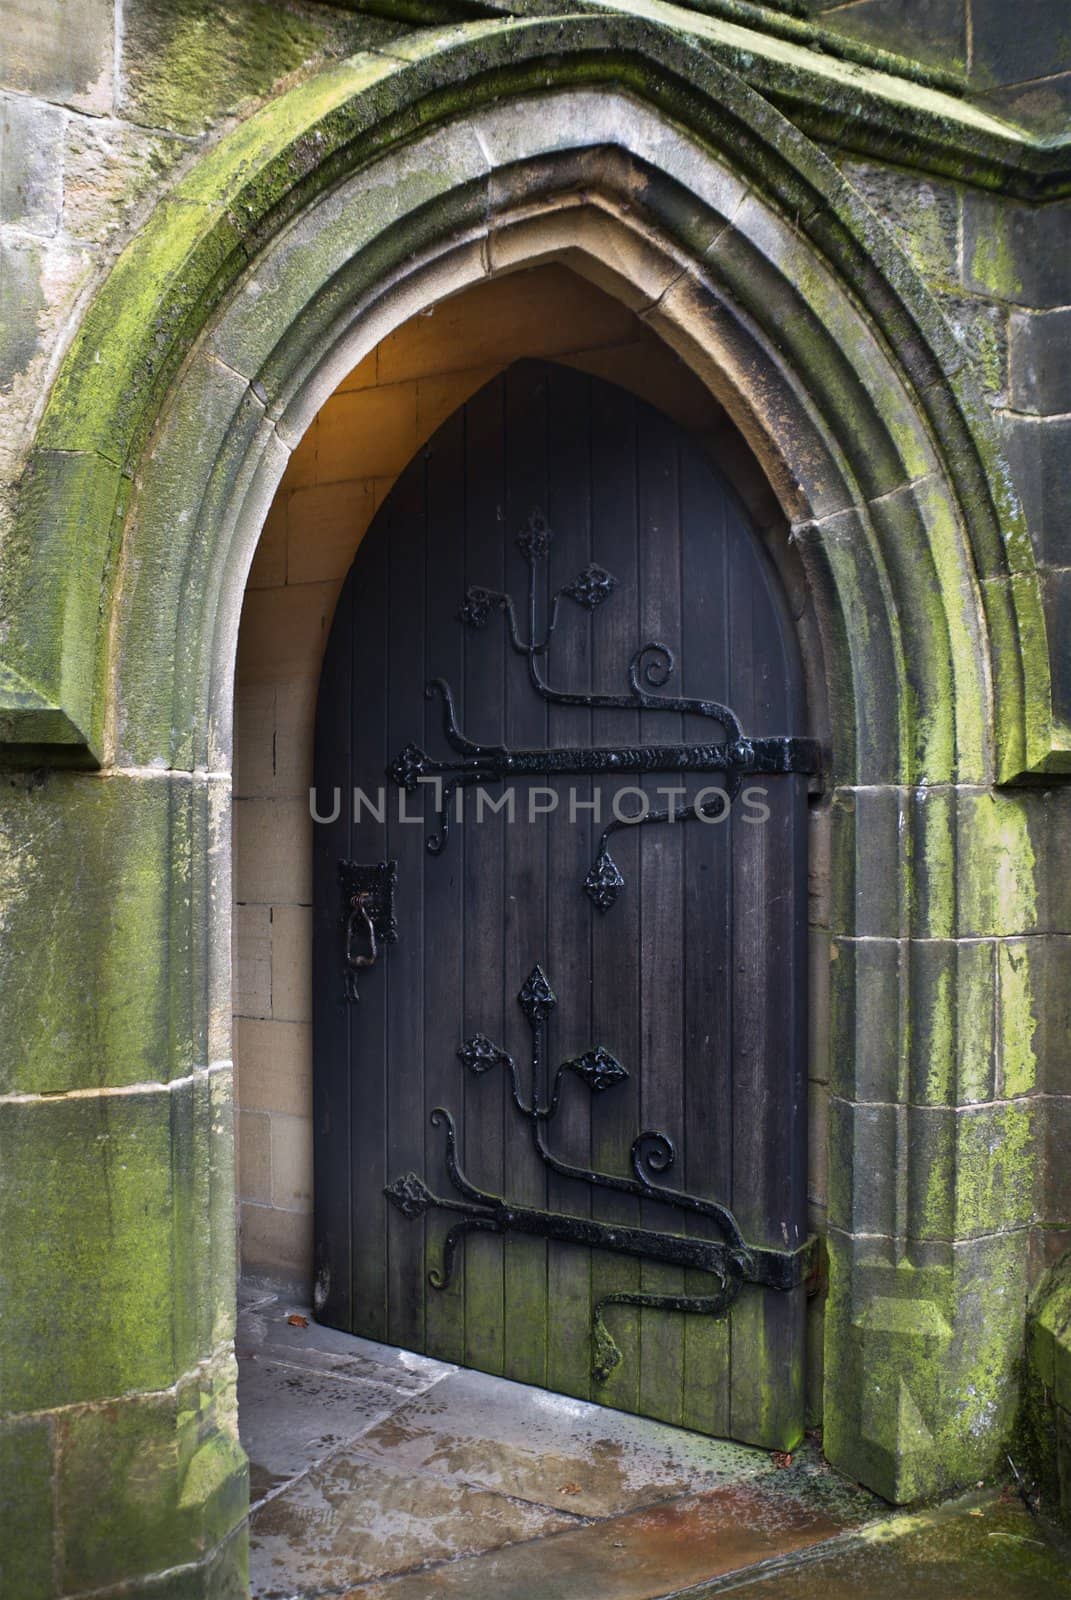 Gothic style church doorway with old iron-hinged door standing open to welcome worshippers